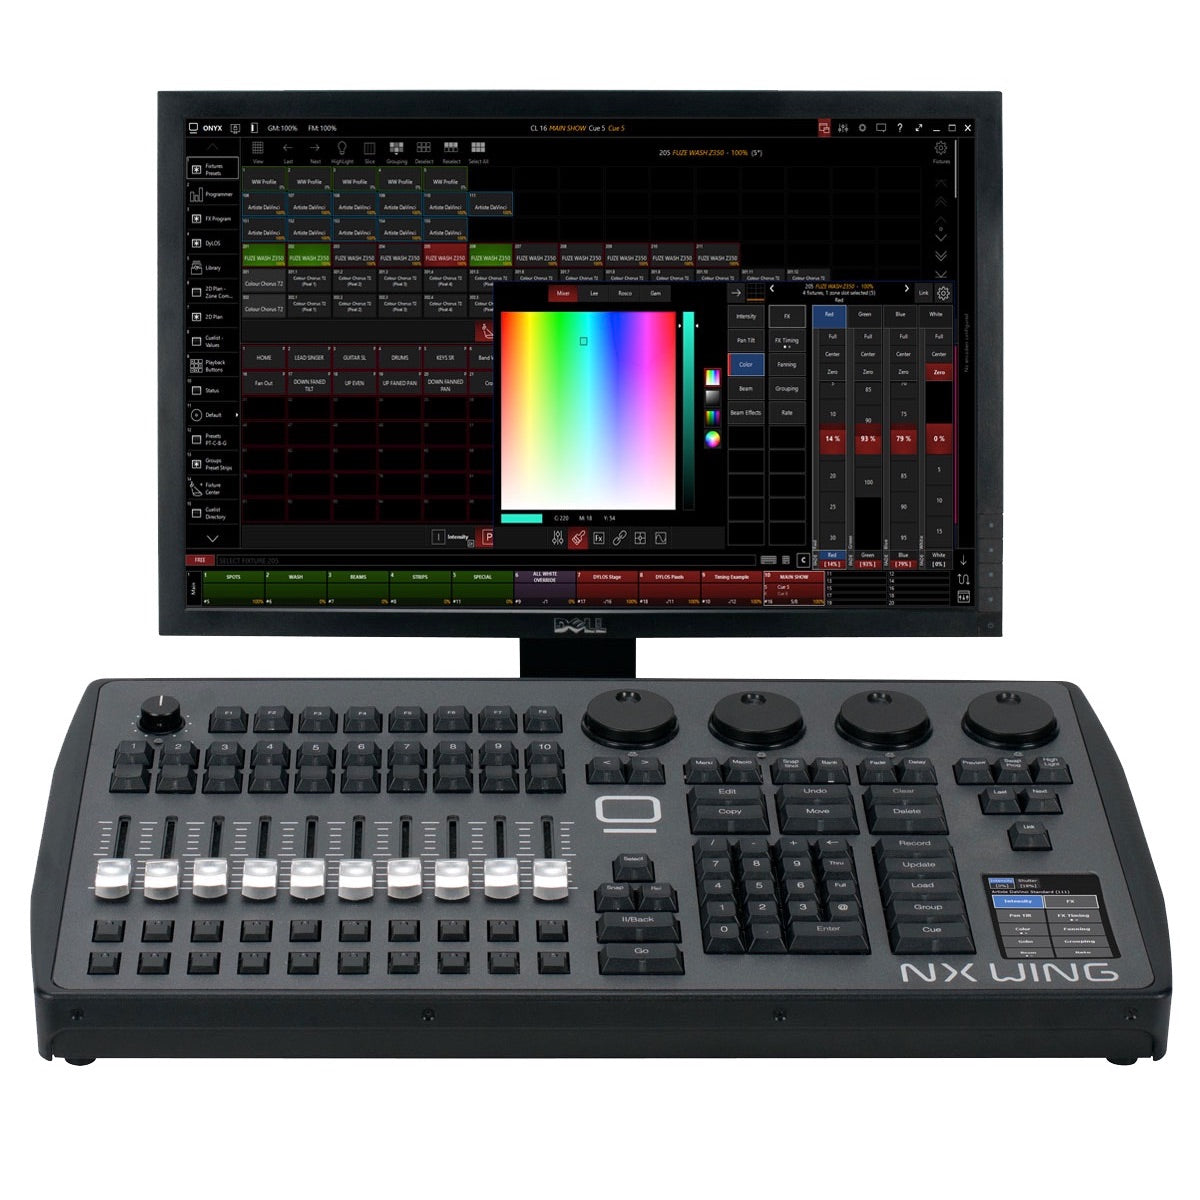 Elation NX WING - 64 Universe, 4x DMX port, SMPTE, MIDI, USB controller, PC not included